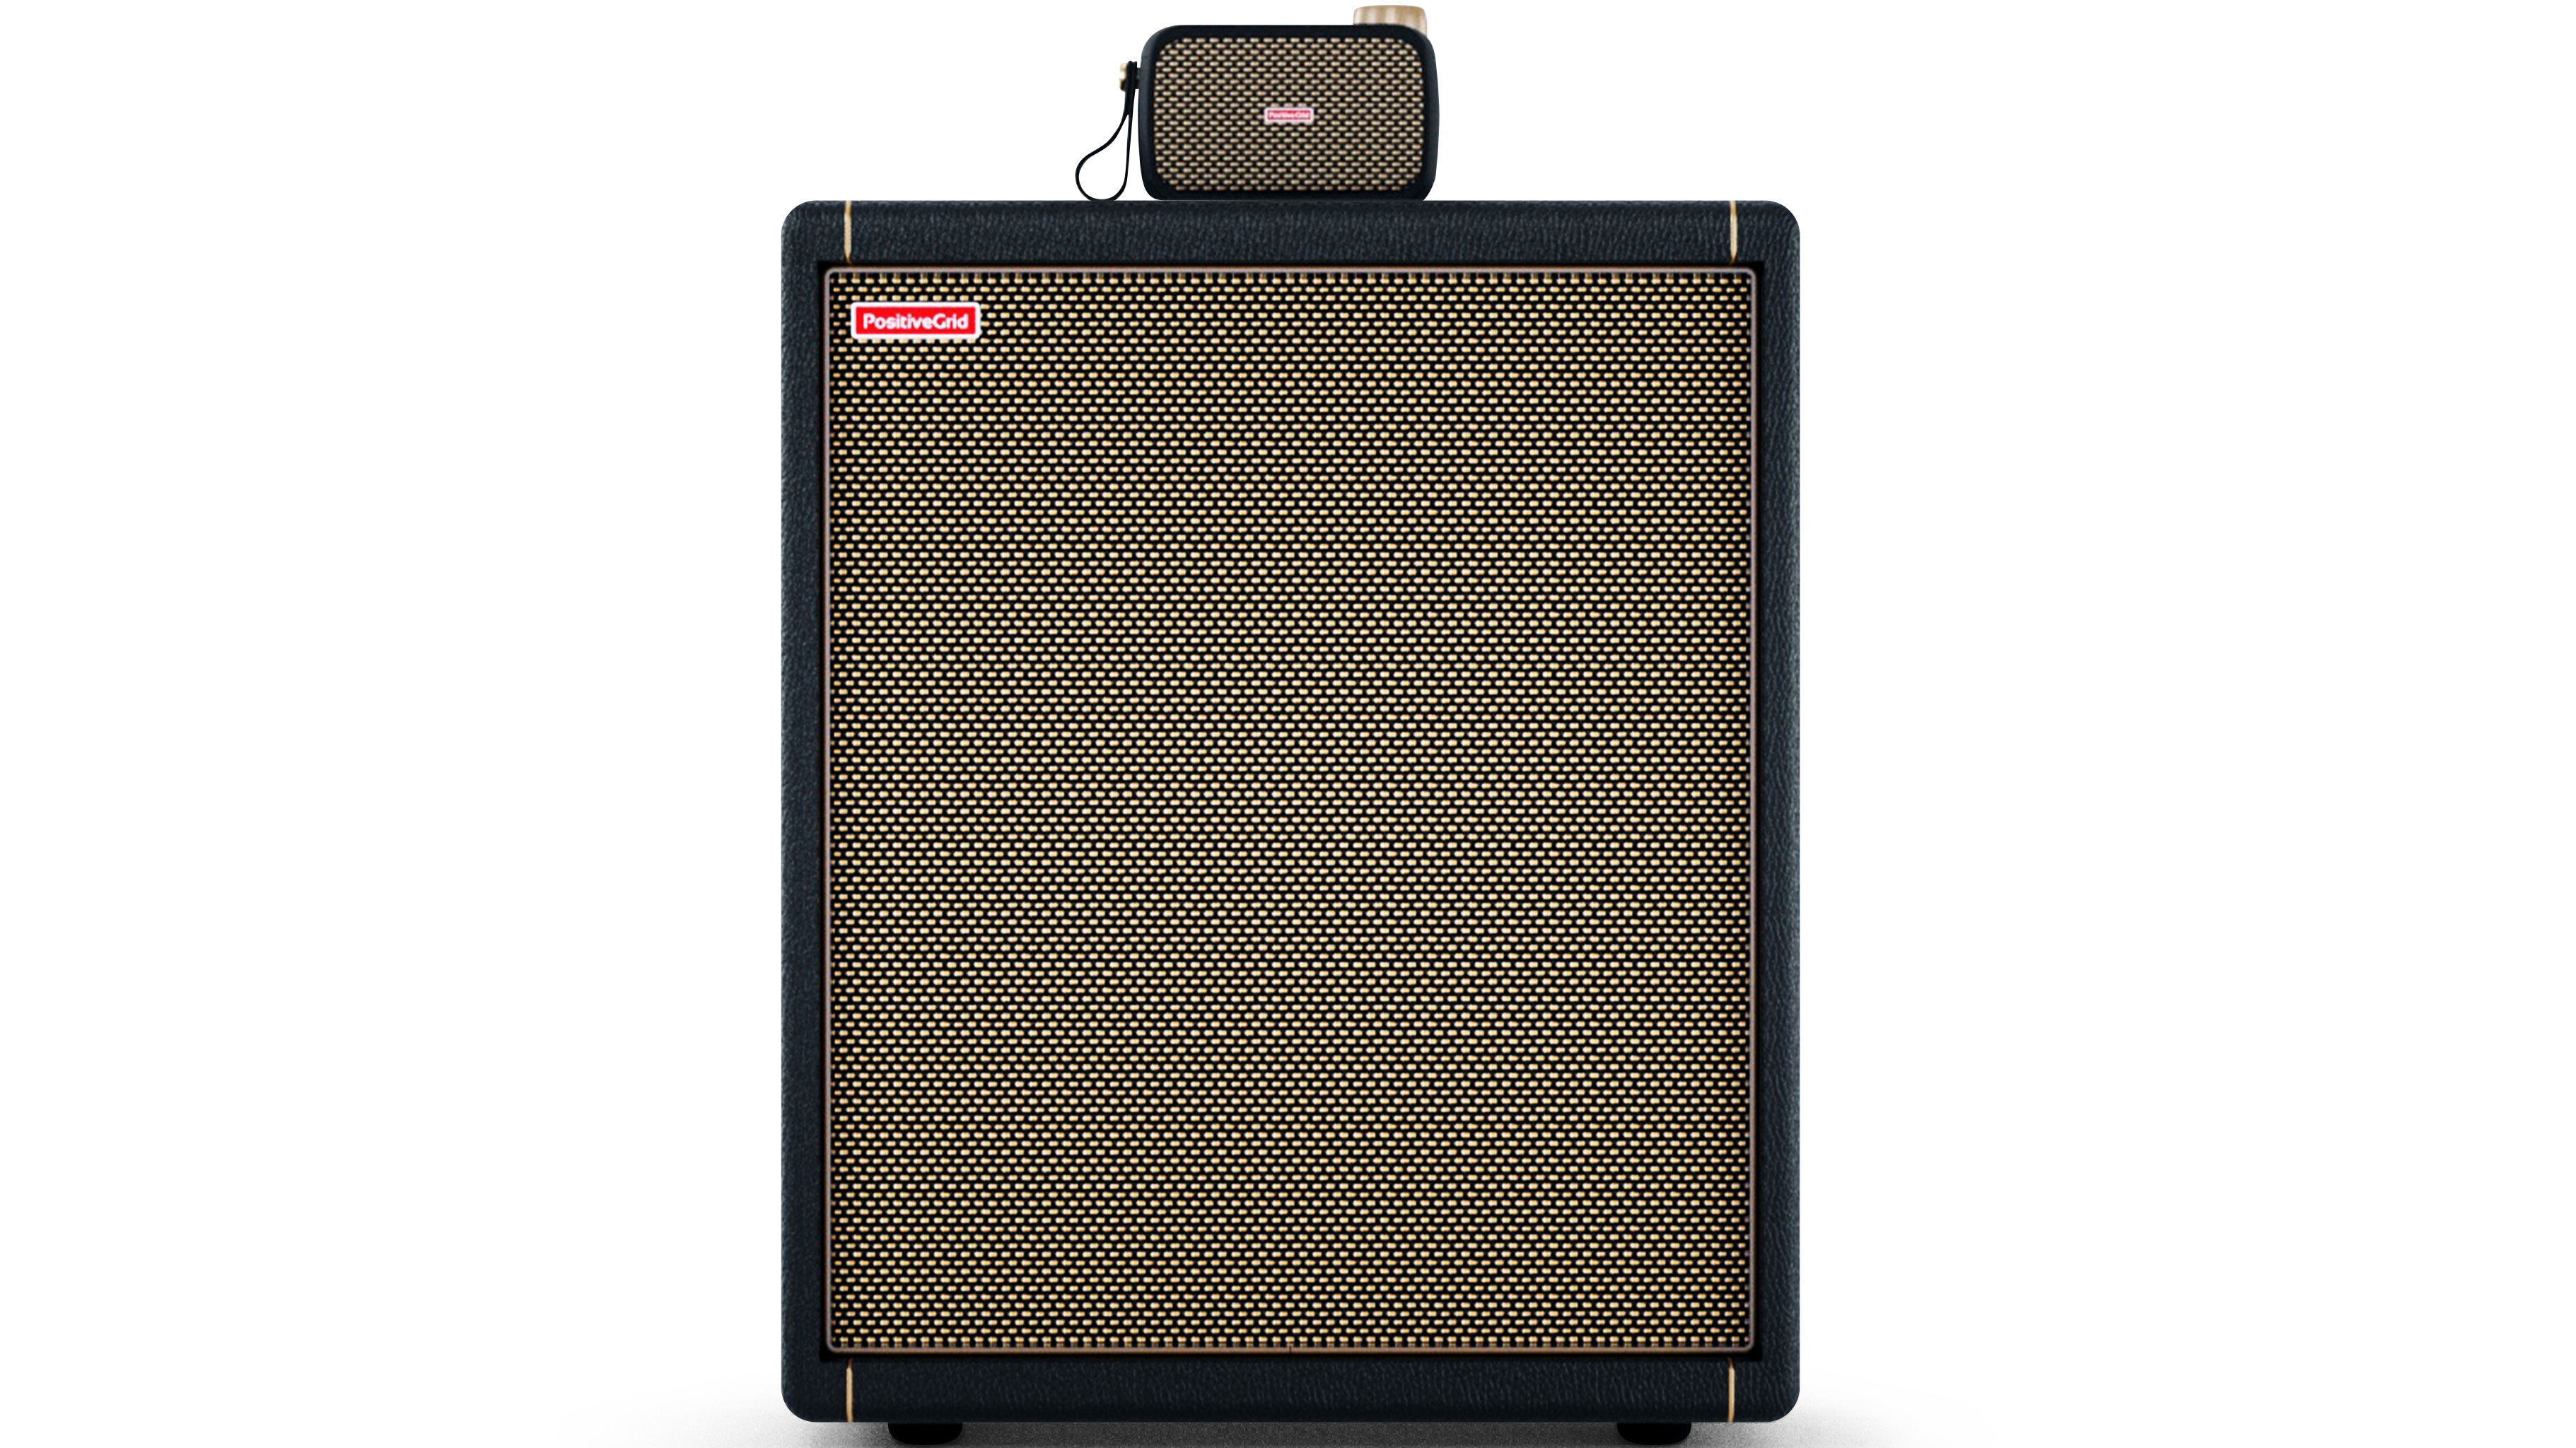 The Positive Grid Spark amps are now giggable with a new 140-watt